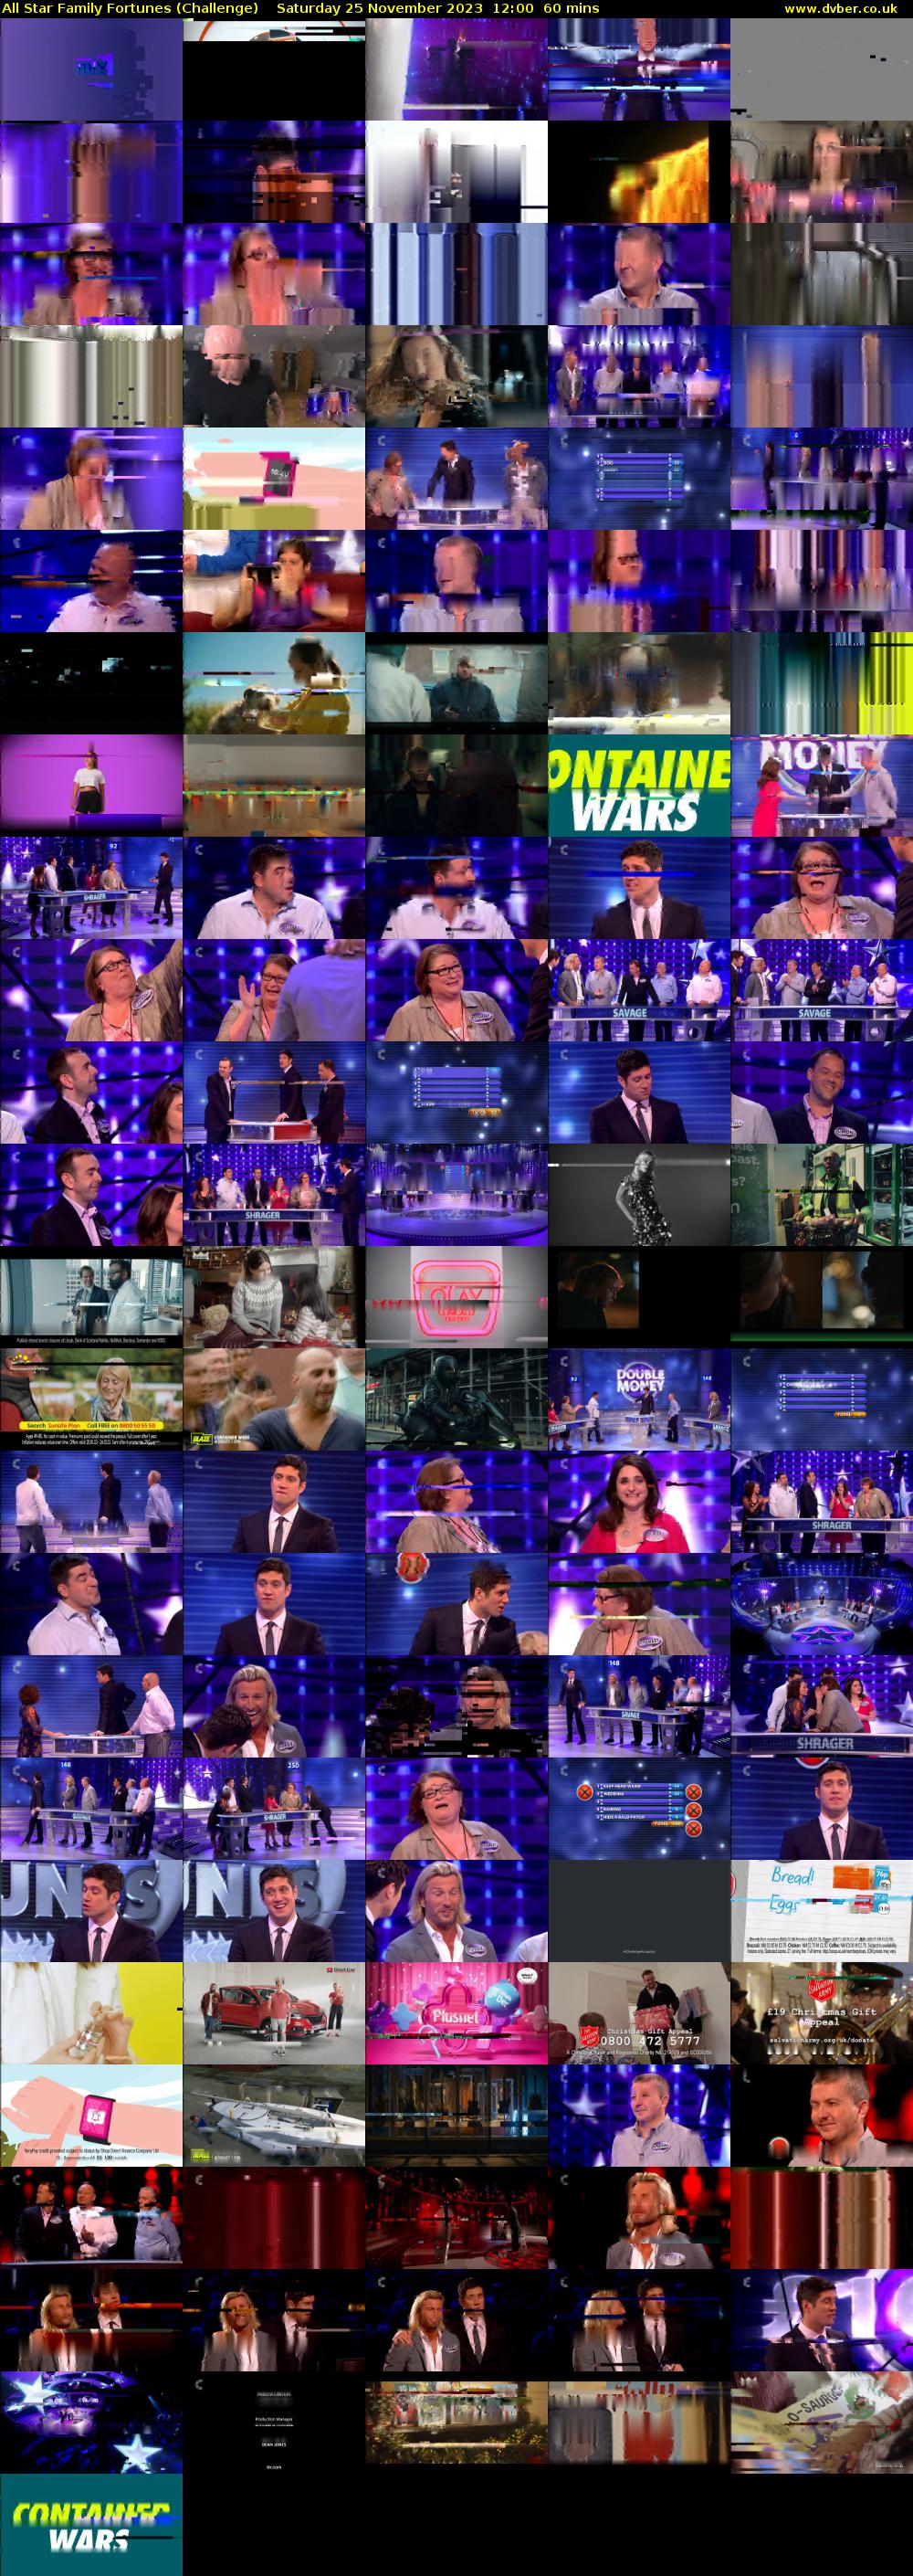 All Star Family Fortunes (Challenge) Saturday 25 November 2023 12:00 - 13:00